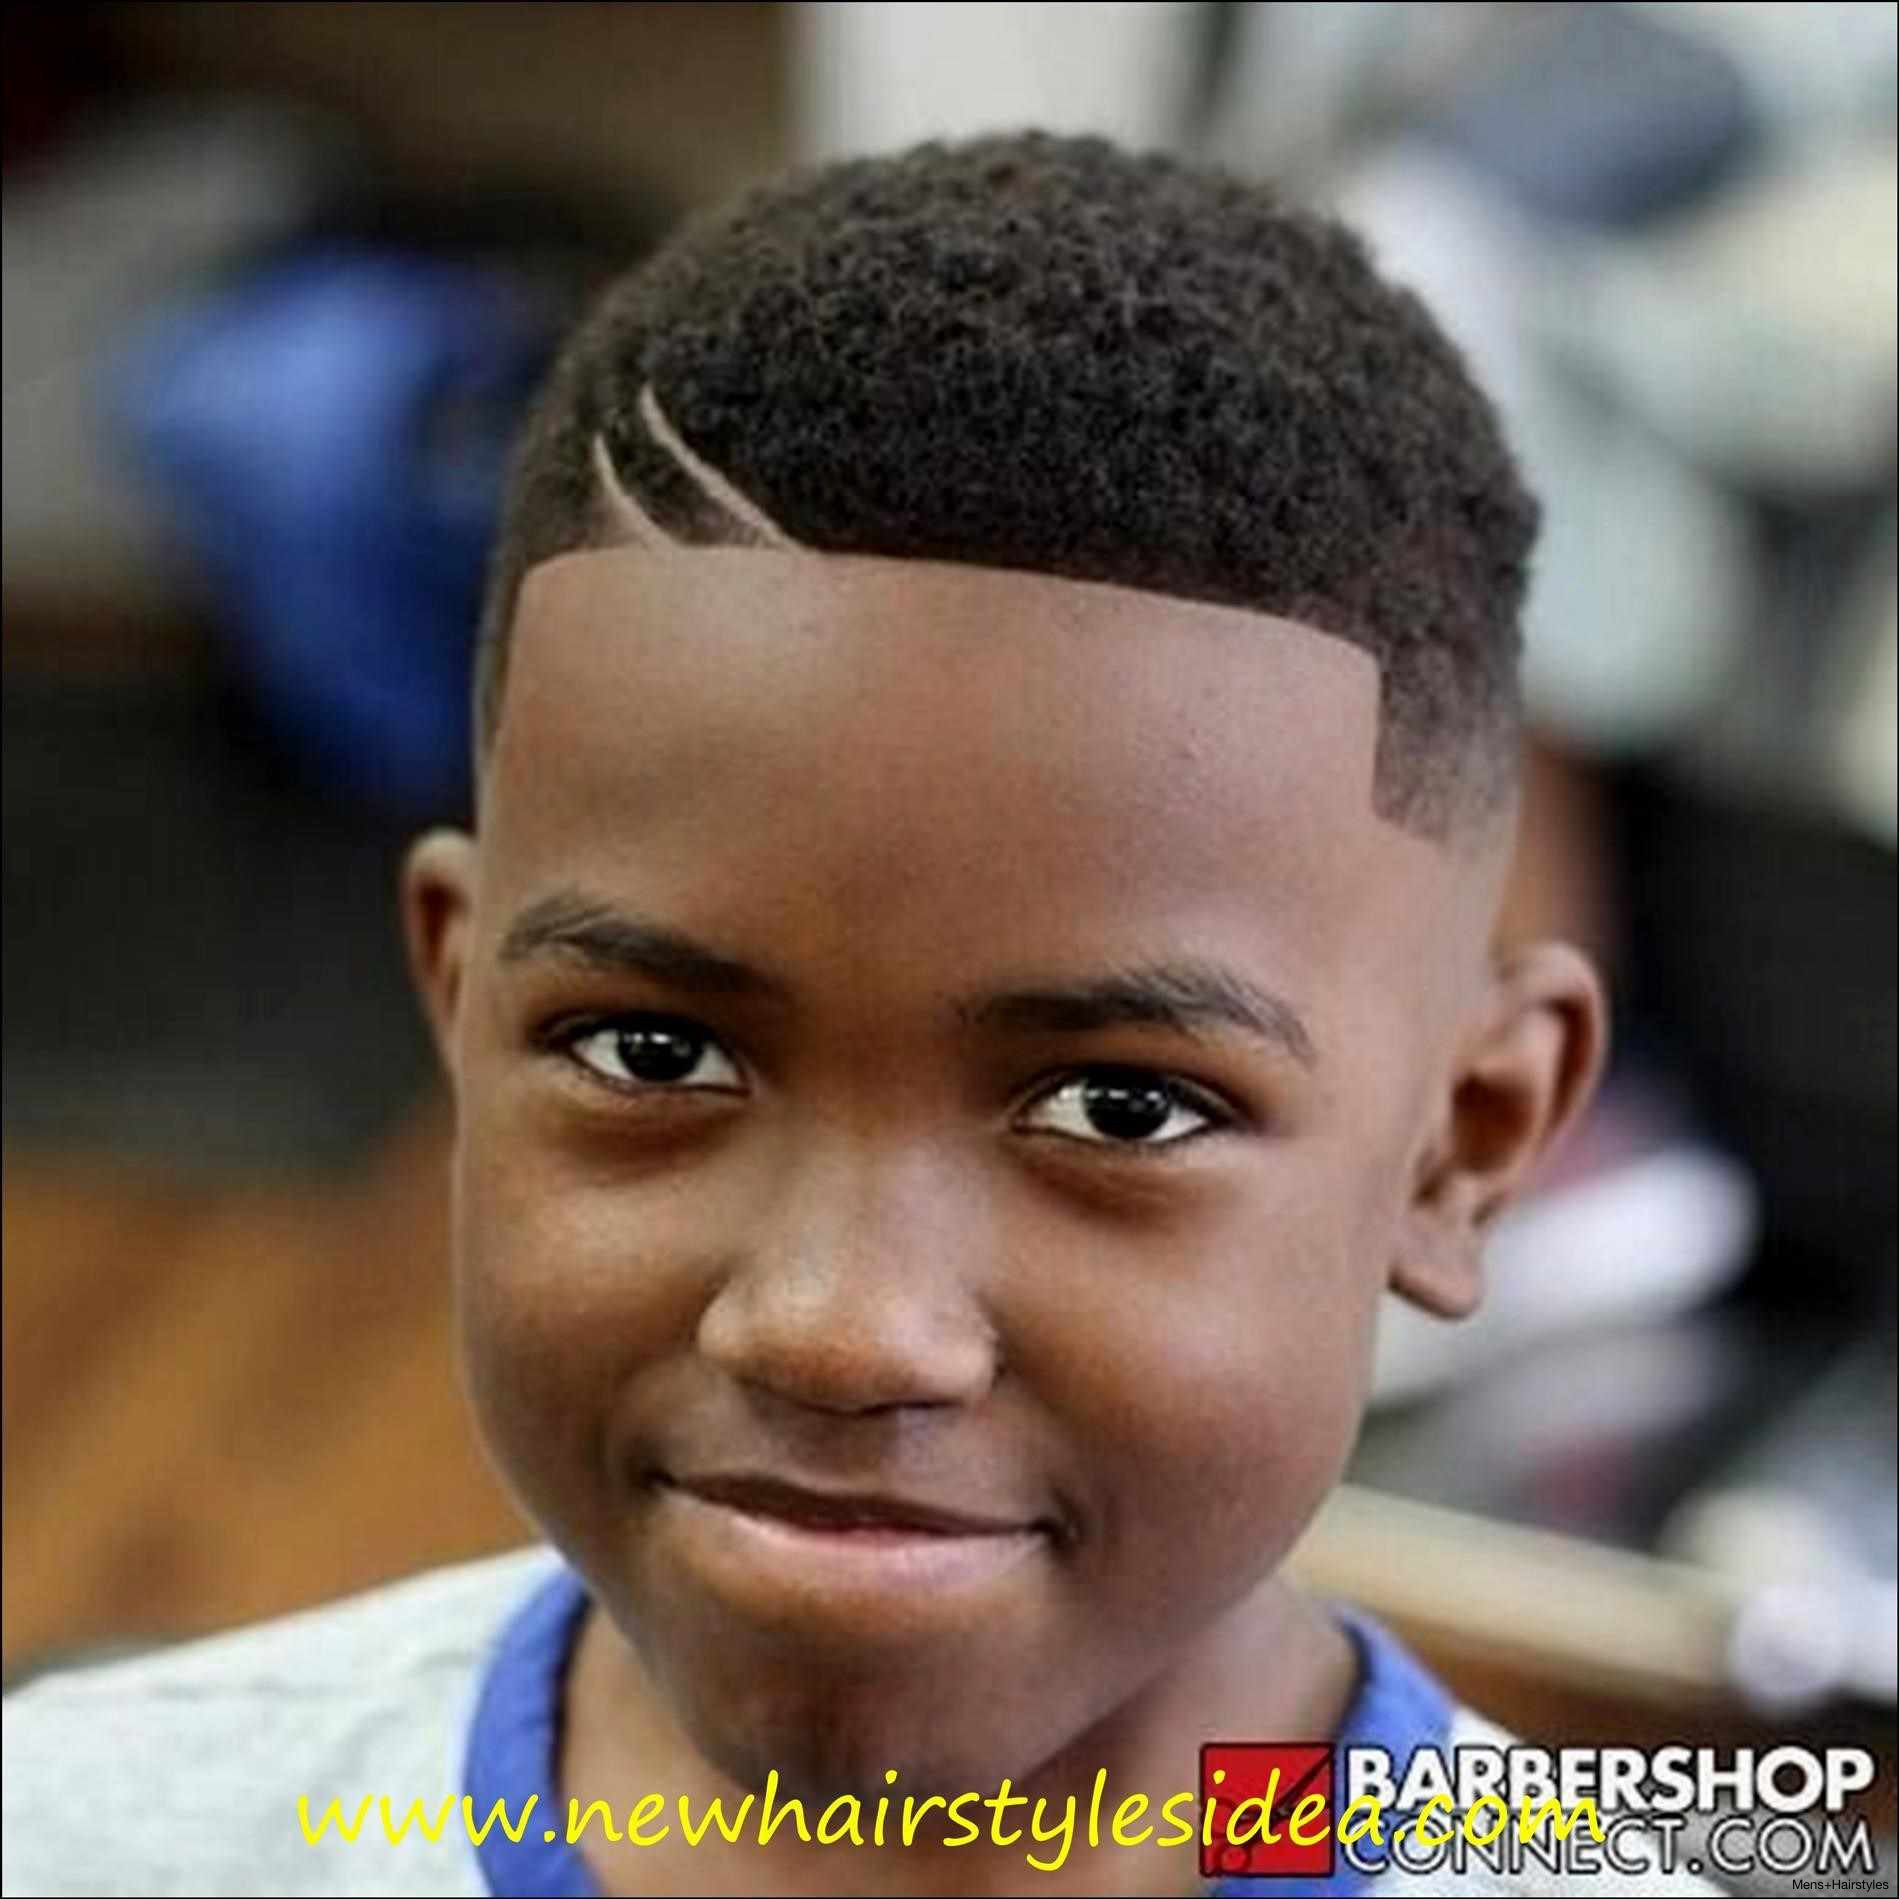 Collections of Black Kids Hair Cut, - Cute Hairstyles For Girls ...